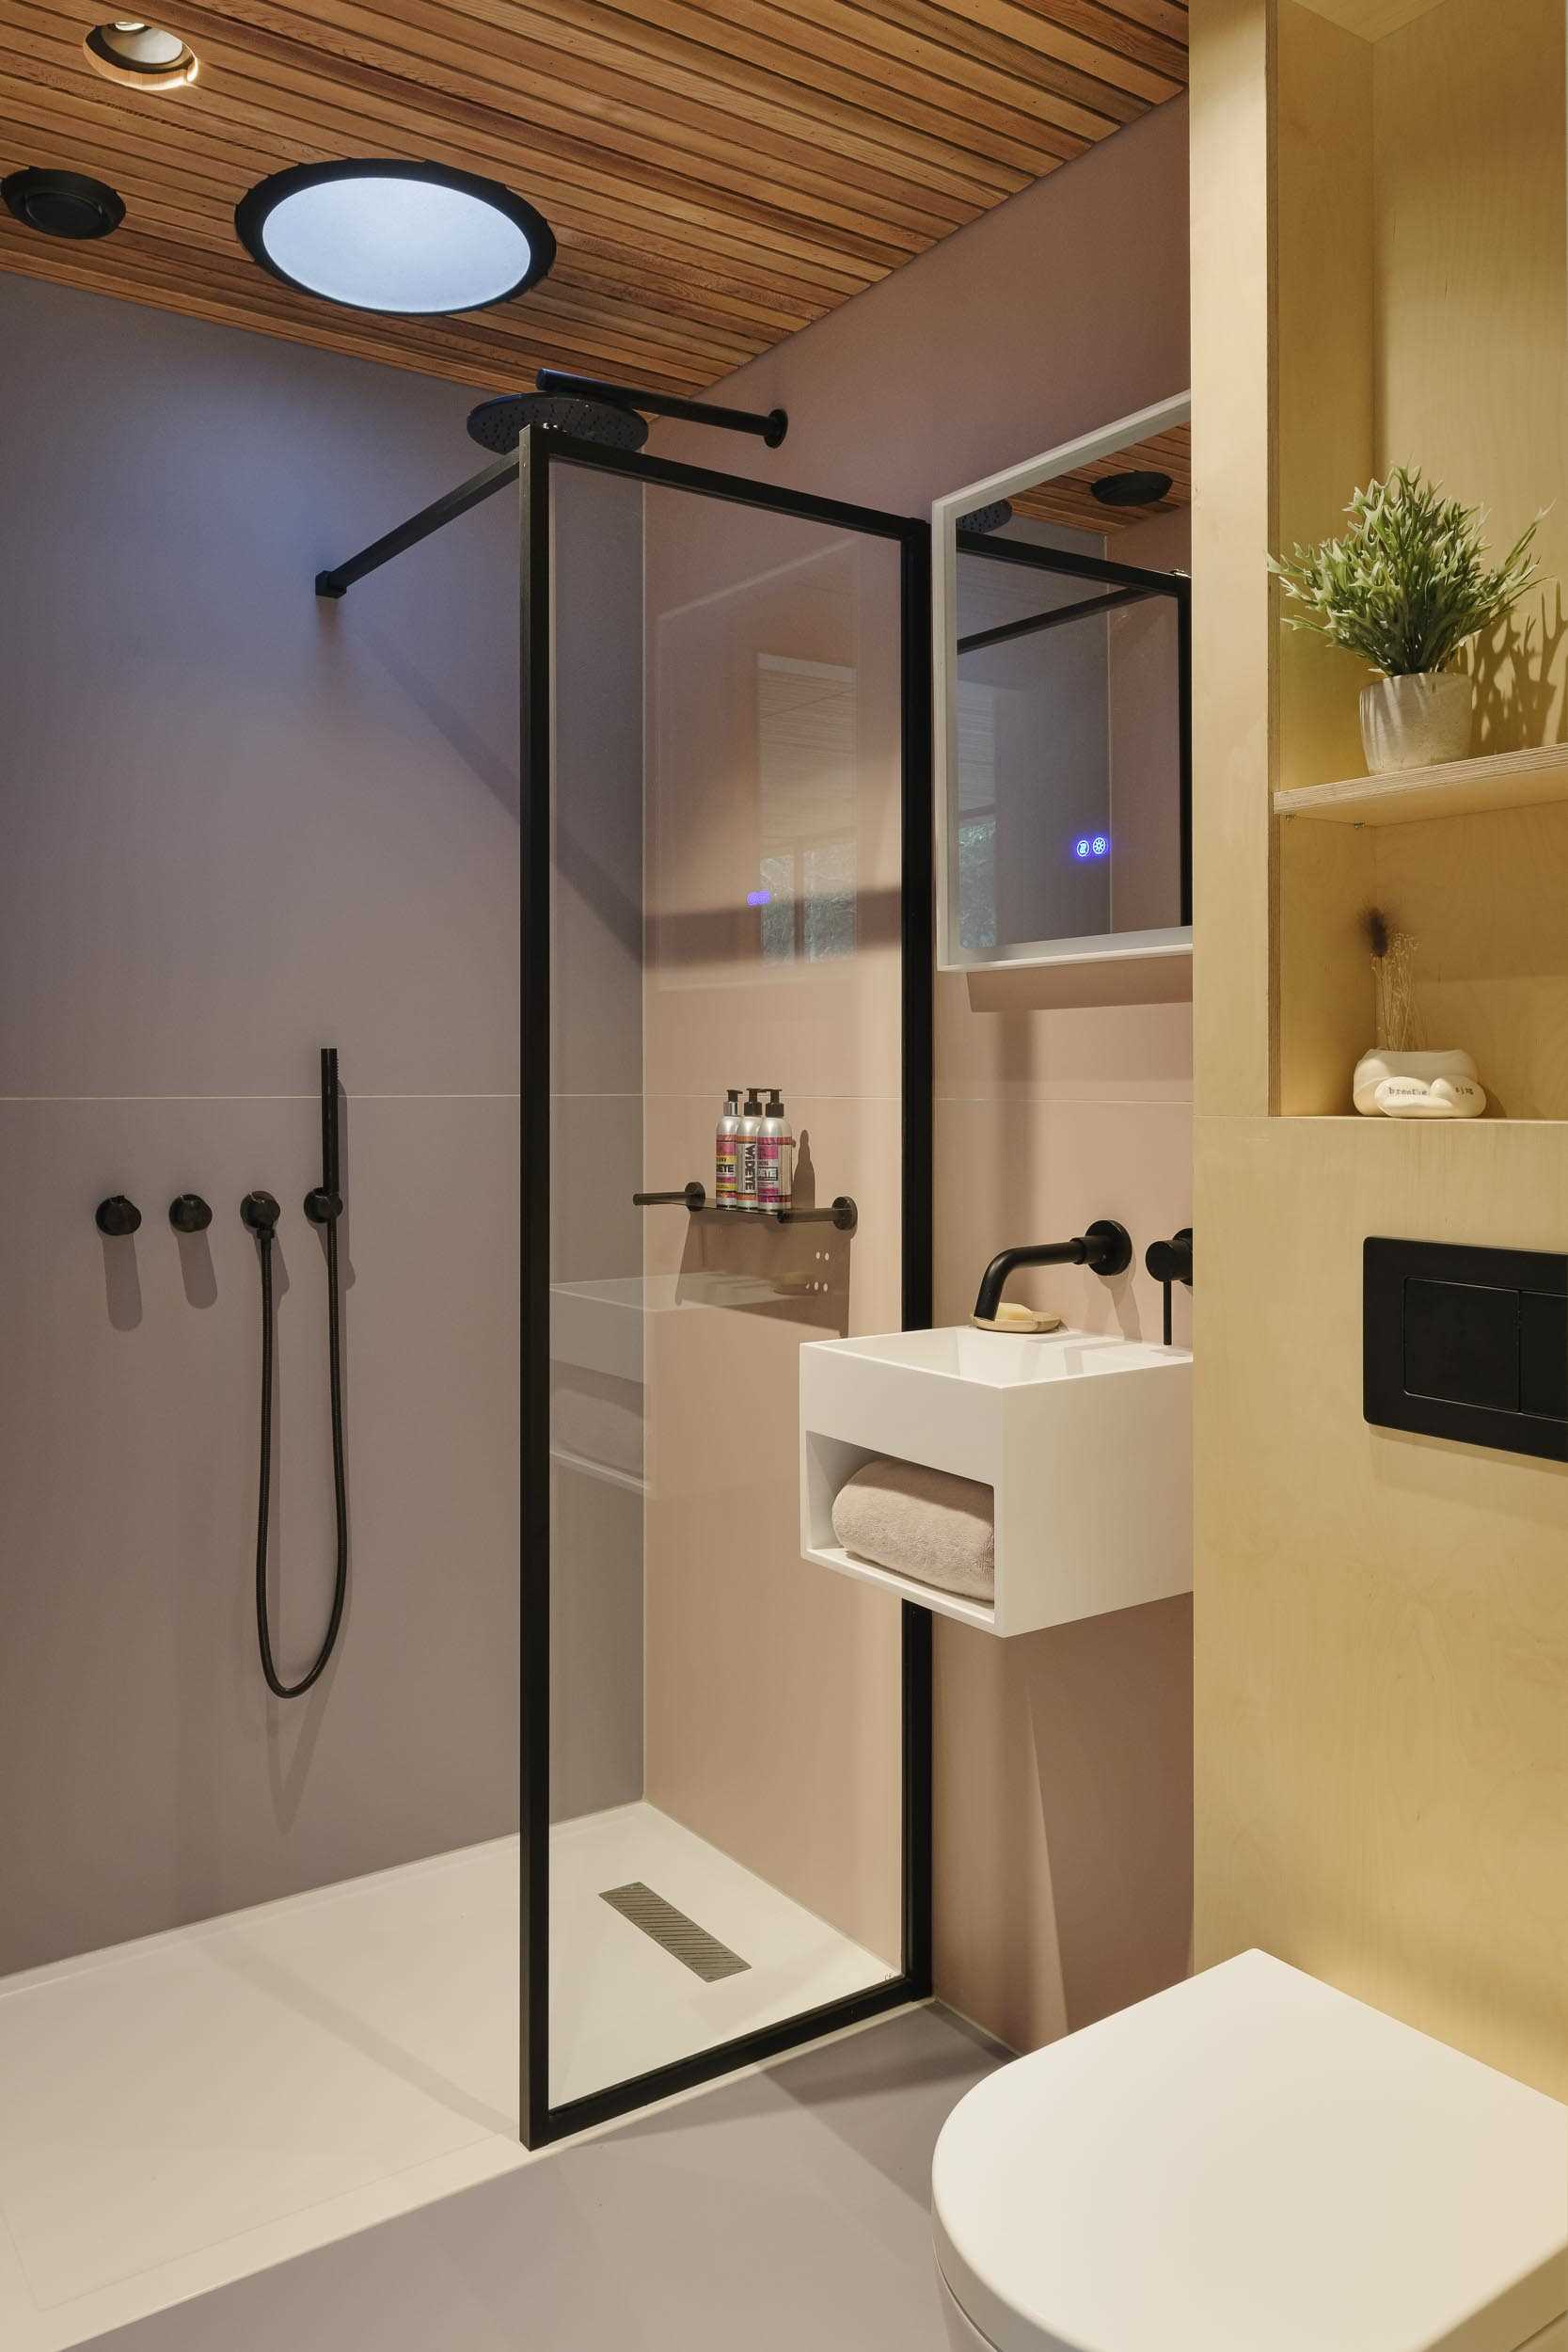 A small en-suite bathroom with a walk-in shower, and black accents.